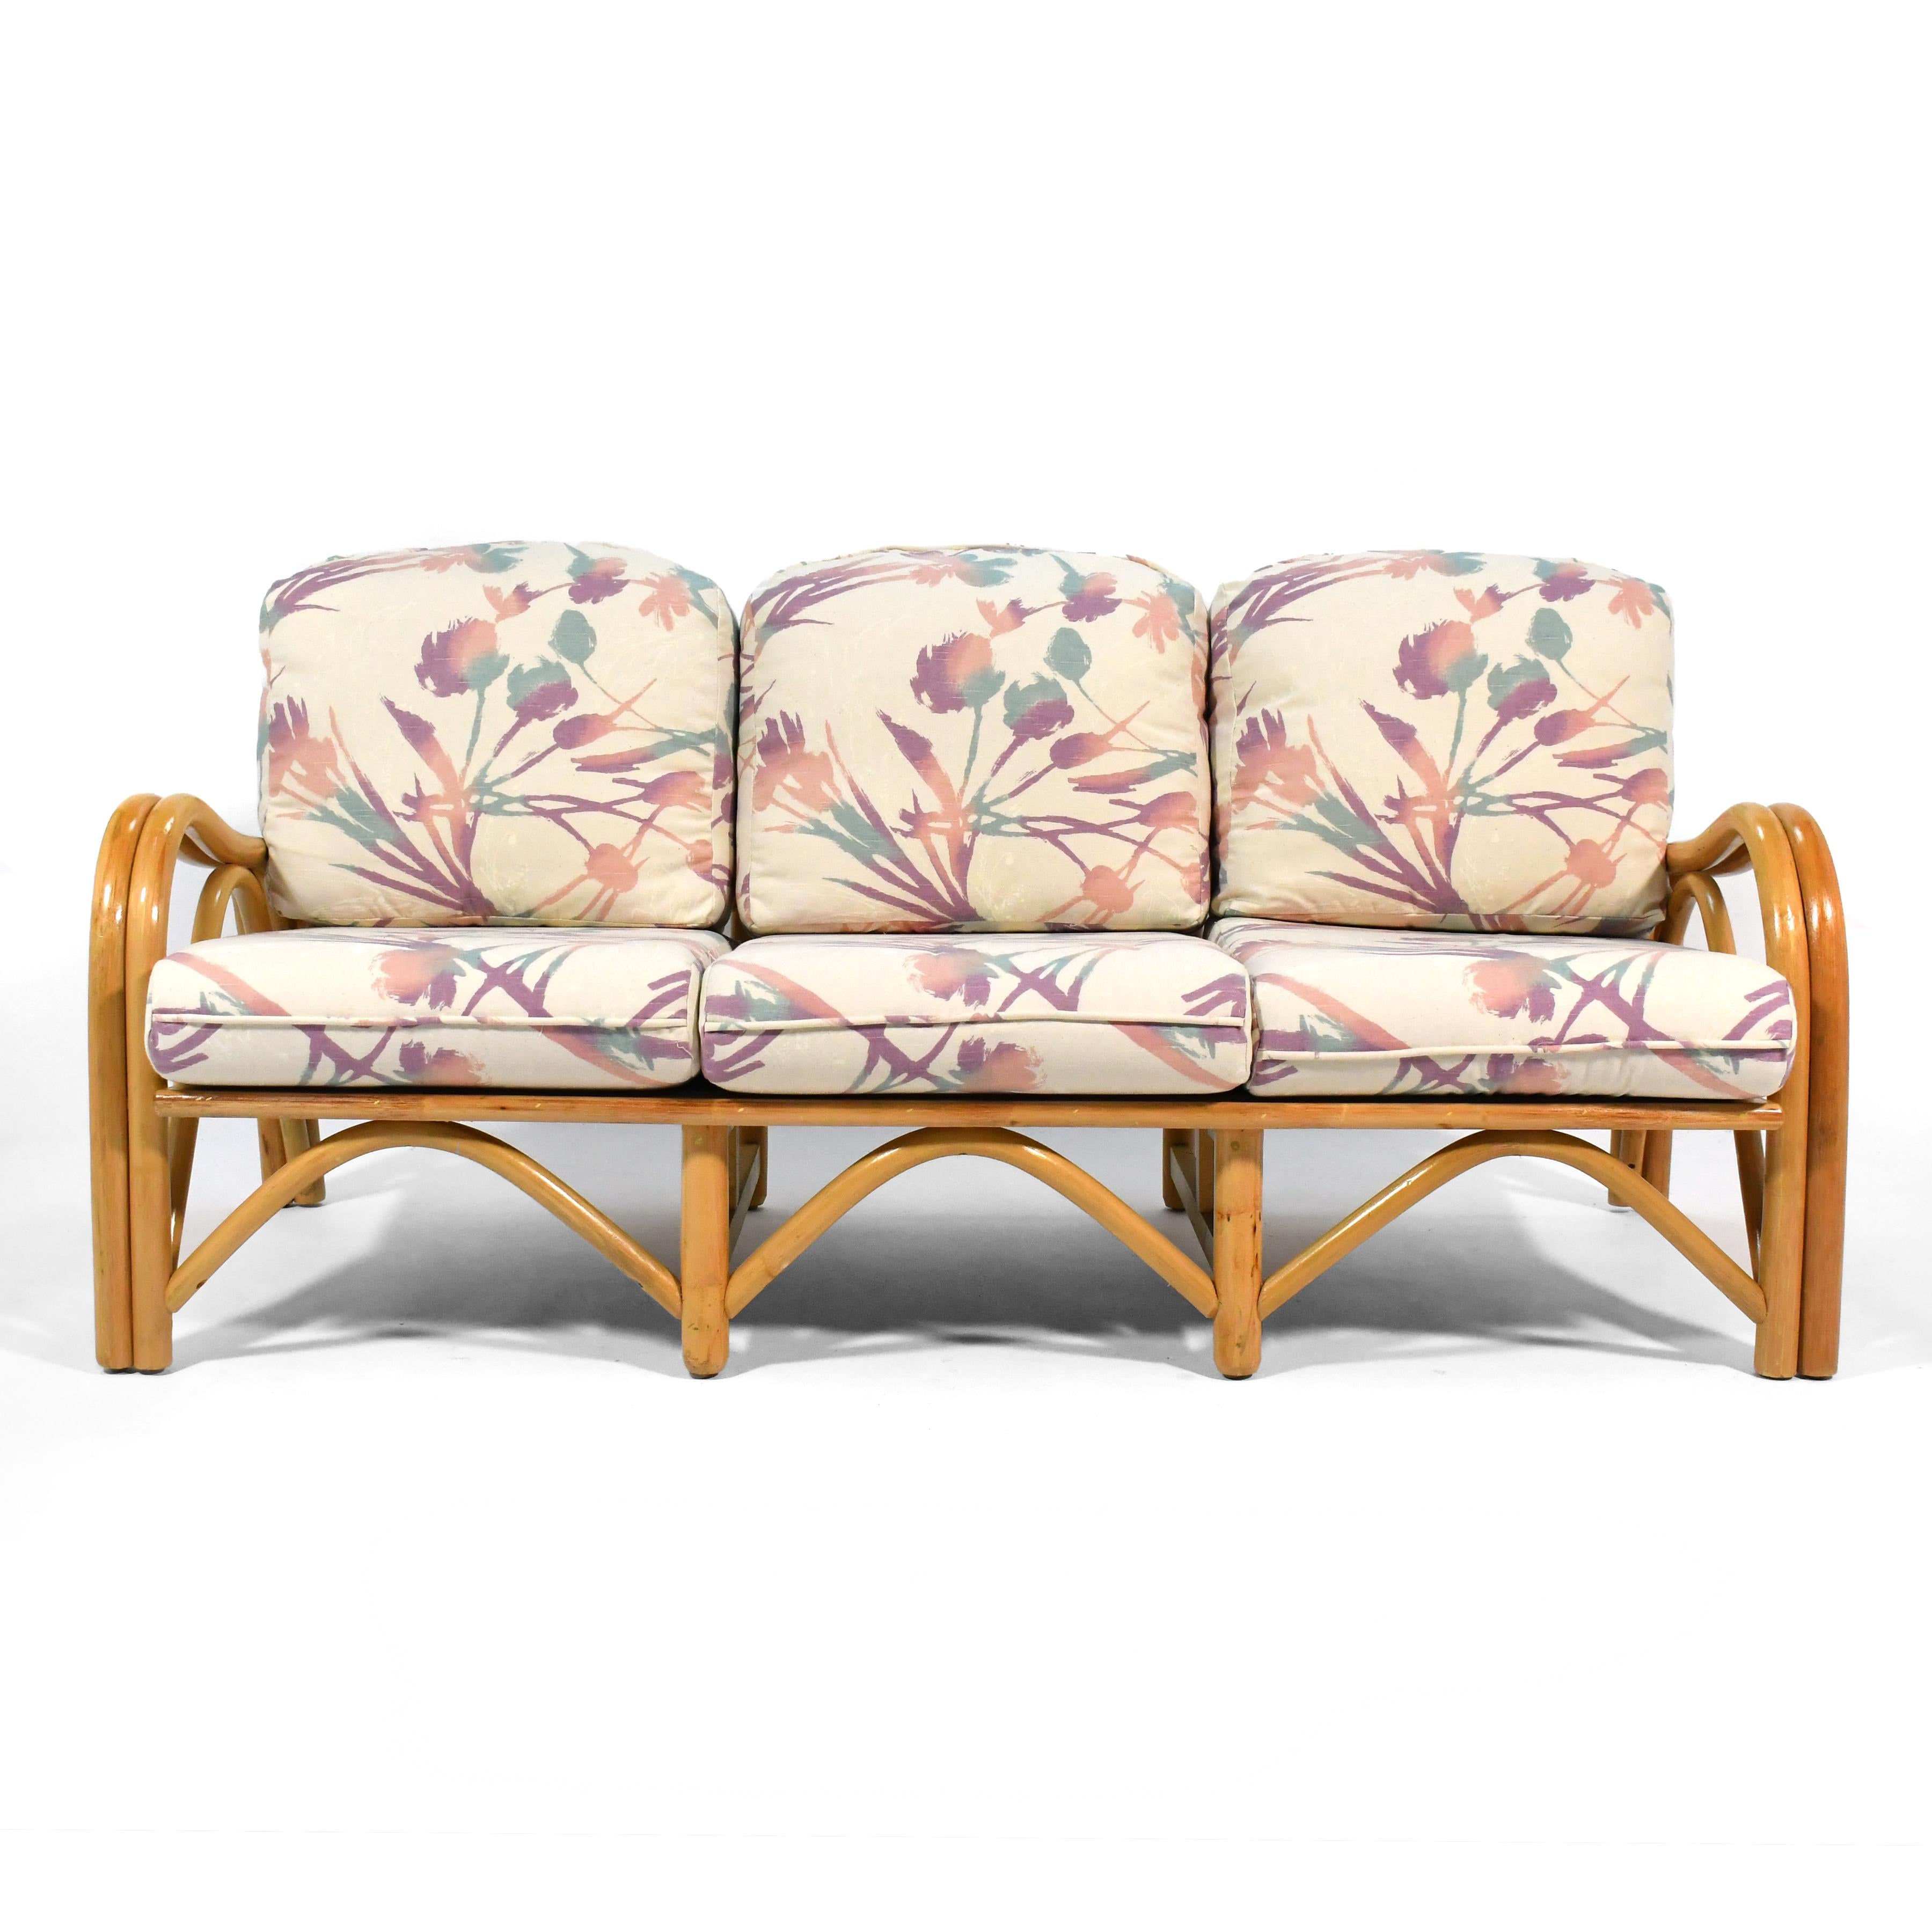 This great three seat rattan sofa is perfect for a mid-century pad or tropical Tiki room. It's incredibly well built and in great original condition.

It has a nice seat depth and pitch, making it very comfortable. The wave-like profile of the